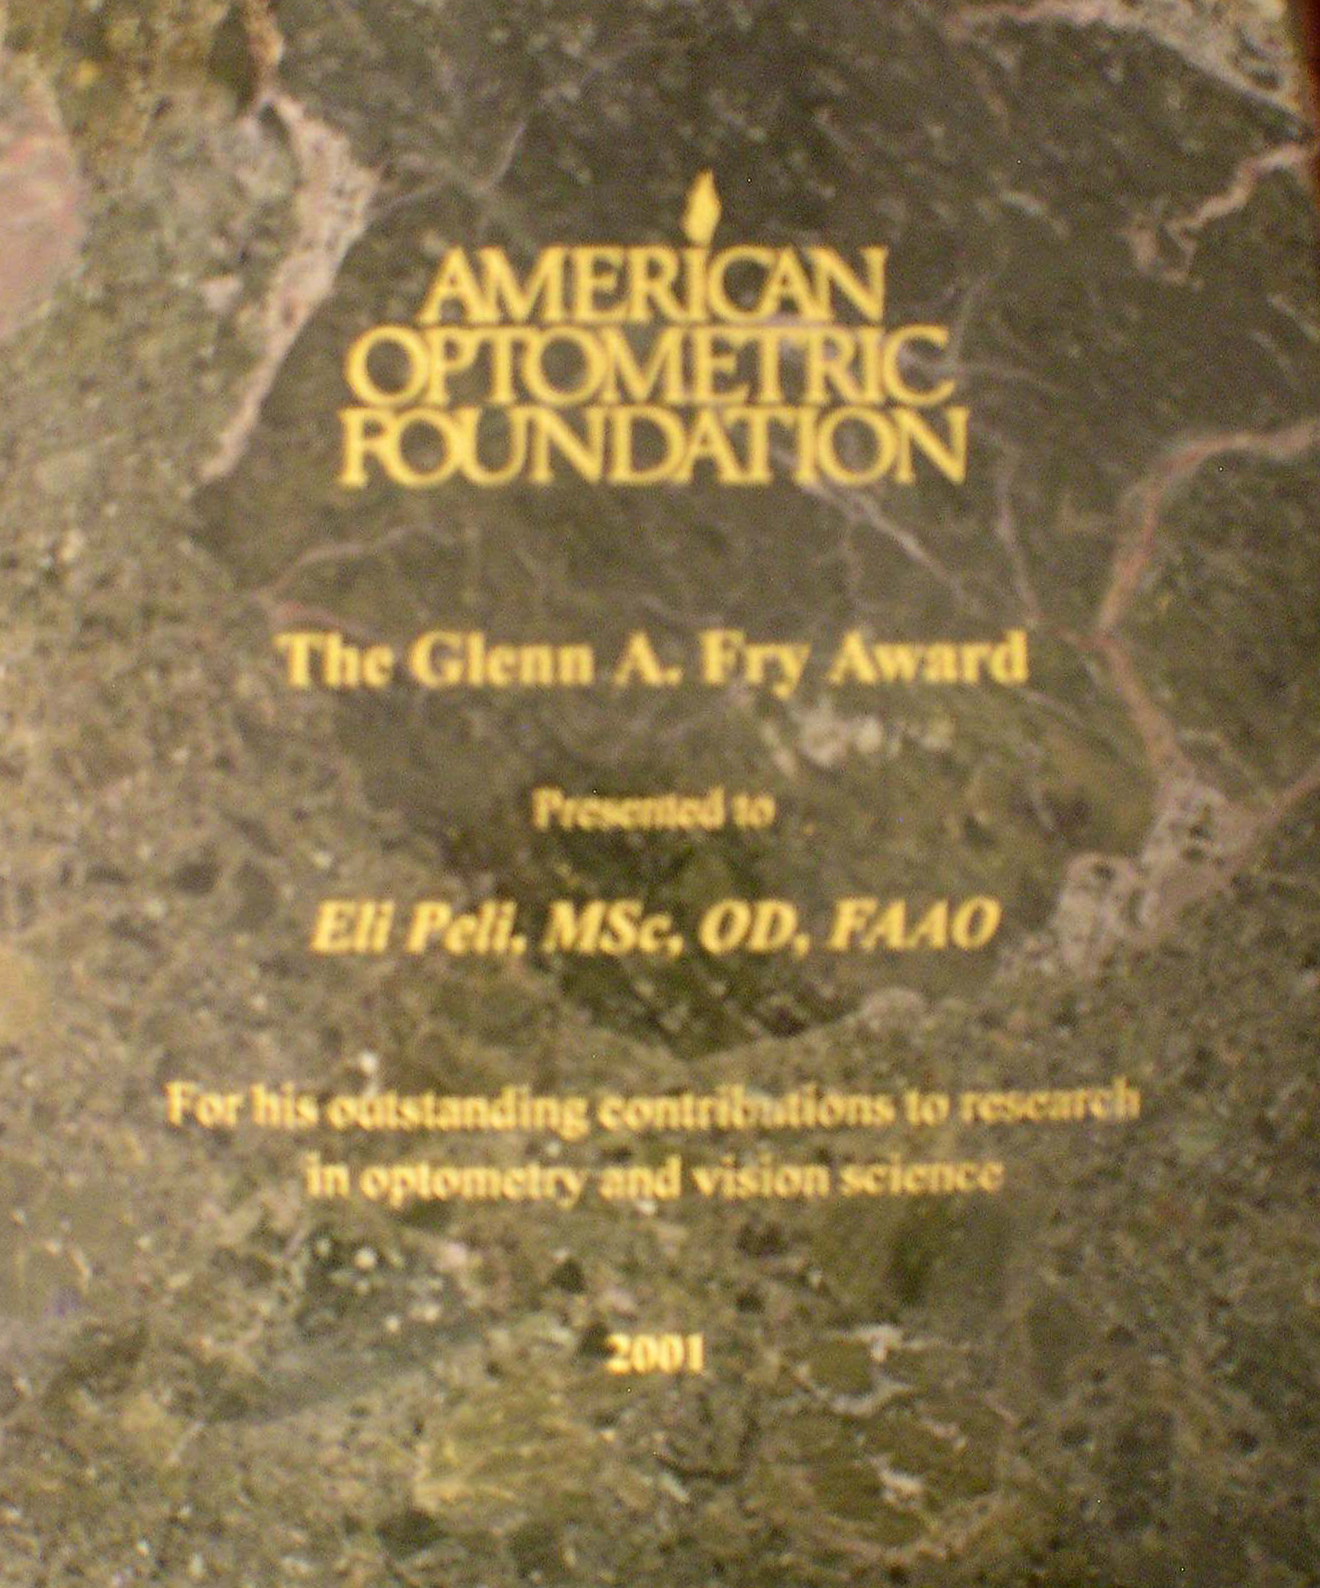 The Glenn A. Fry Lecture Award